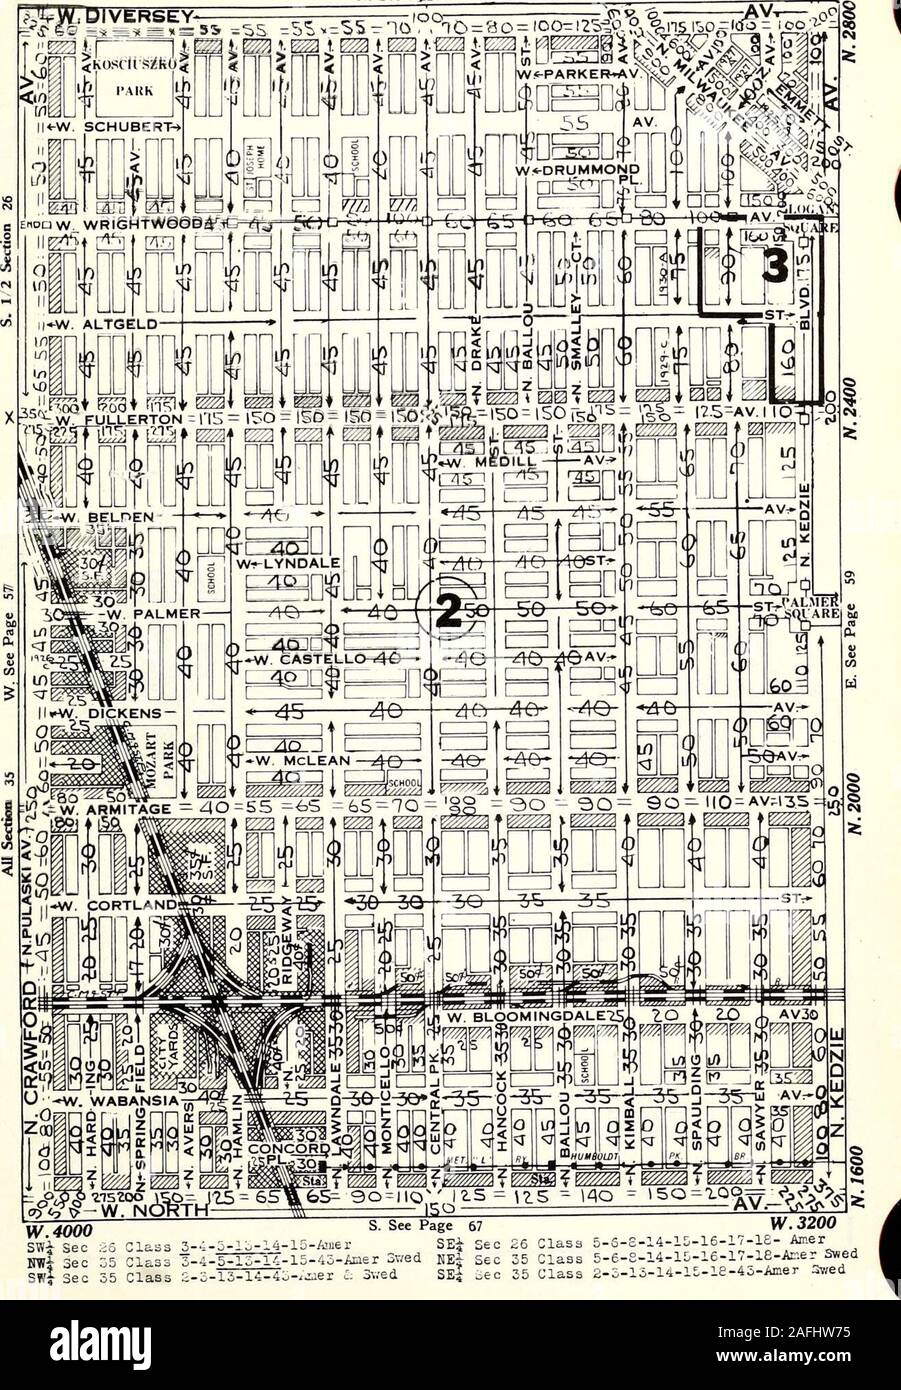 . Olcott's land values blue book of Chicago. IV,b;/?, SwI seo 34 Class 2-3-42.A.er 4 S.el g |«o S^ Clas. l-J:|:l|:it-l:er * S,8d 15-18-Amer OLCOTTS LAND VALUES & ZONING 1936T. 40 N.—R. 13 E. N. See Pa?e 49 58. W.4000 SWi Sec :jo Class 3- irwi Sec 35 Class 3- SVt Sec 35 Class 2- ^. See Page 67 W. 3200 -14-15-A!iier SEi Sec 26 Class 5-5-8-14-15-16-17-18- Air.er rrr-l5-45-Aner 3v;ed HEi Sec 35 Class 5-6-e-14-15-16-17-ie-Arier Svsed j-5-13-14-15-l£-45-Amer 3v;ed jiier c. Sv.ed 35 Class OLCOTTS LAND VALUES BLUE BOOK Specialists in the Management Selling Insuring and Financing of North-West Side Pro Stock Photo